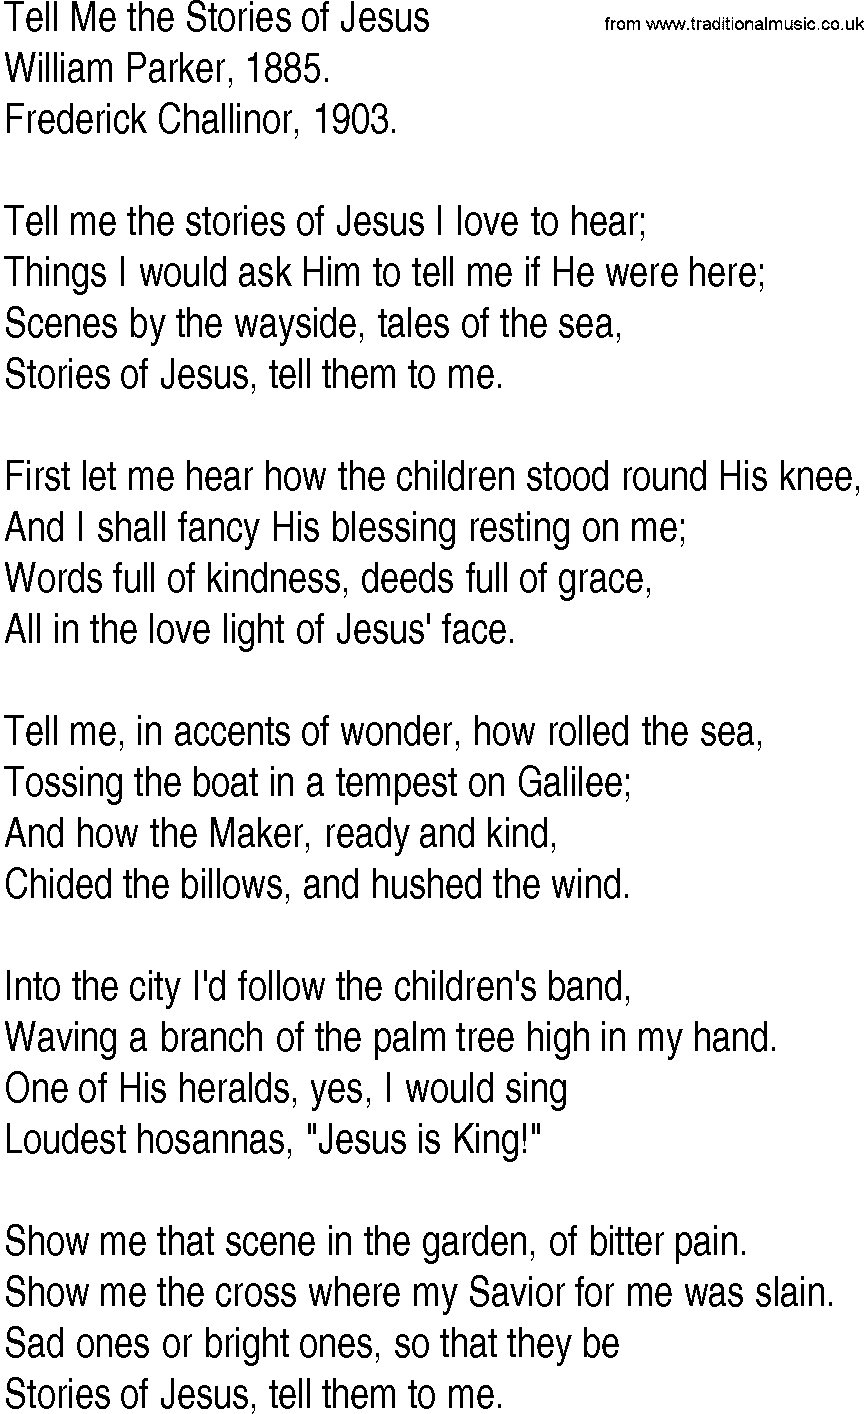 Hymn and Gospel Song: Tell Me the Stories of Jesus by William Parker lyrics